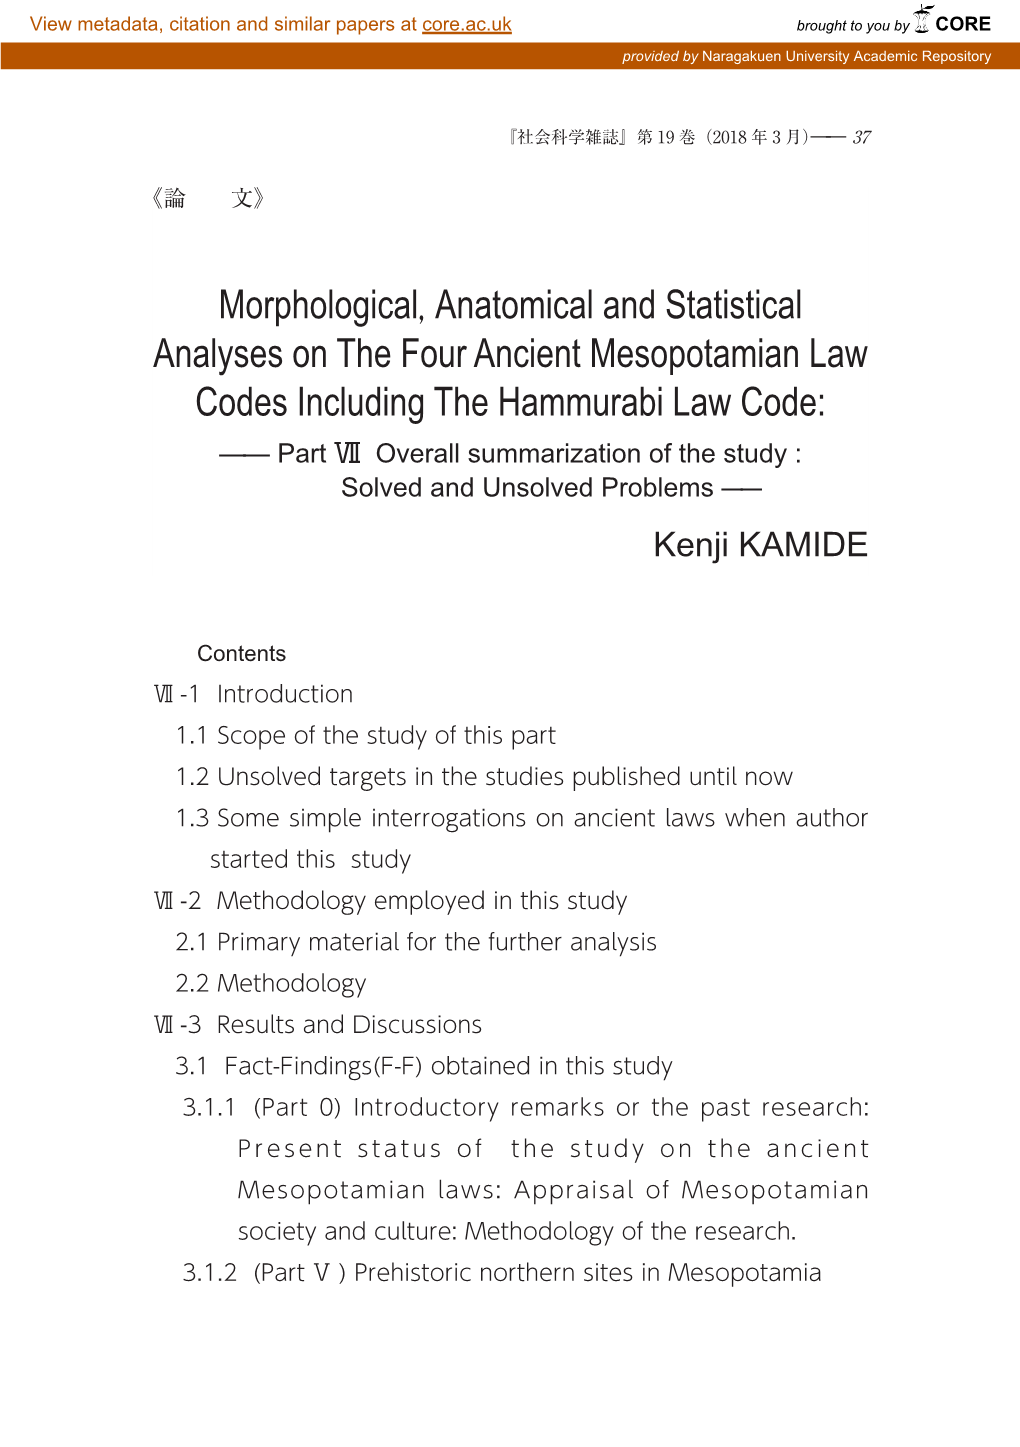 Morphological, Anatomical and Statistical Analyses on The